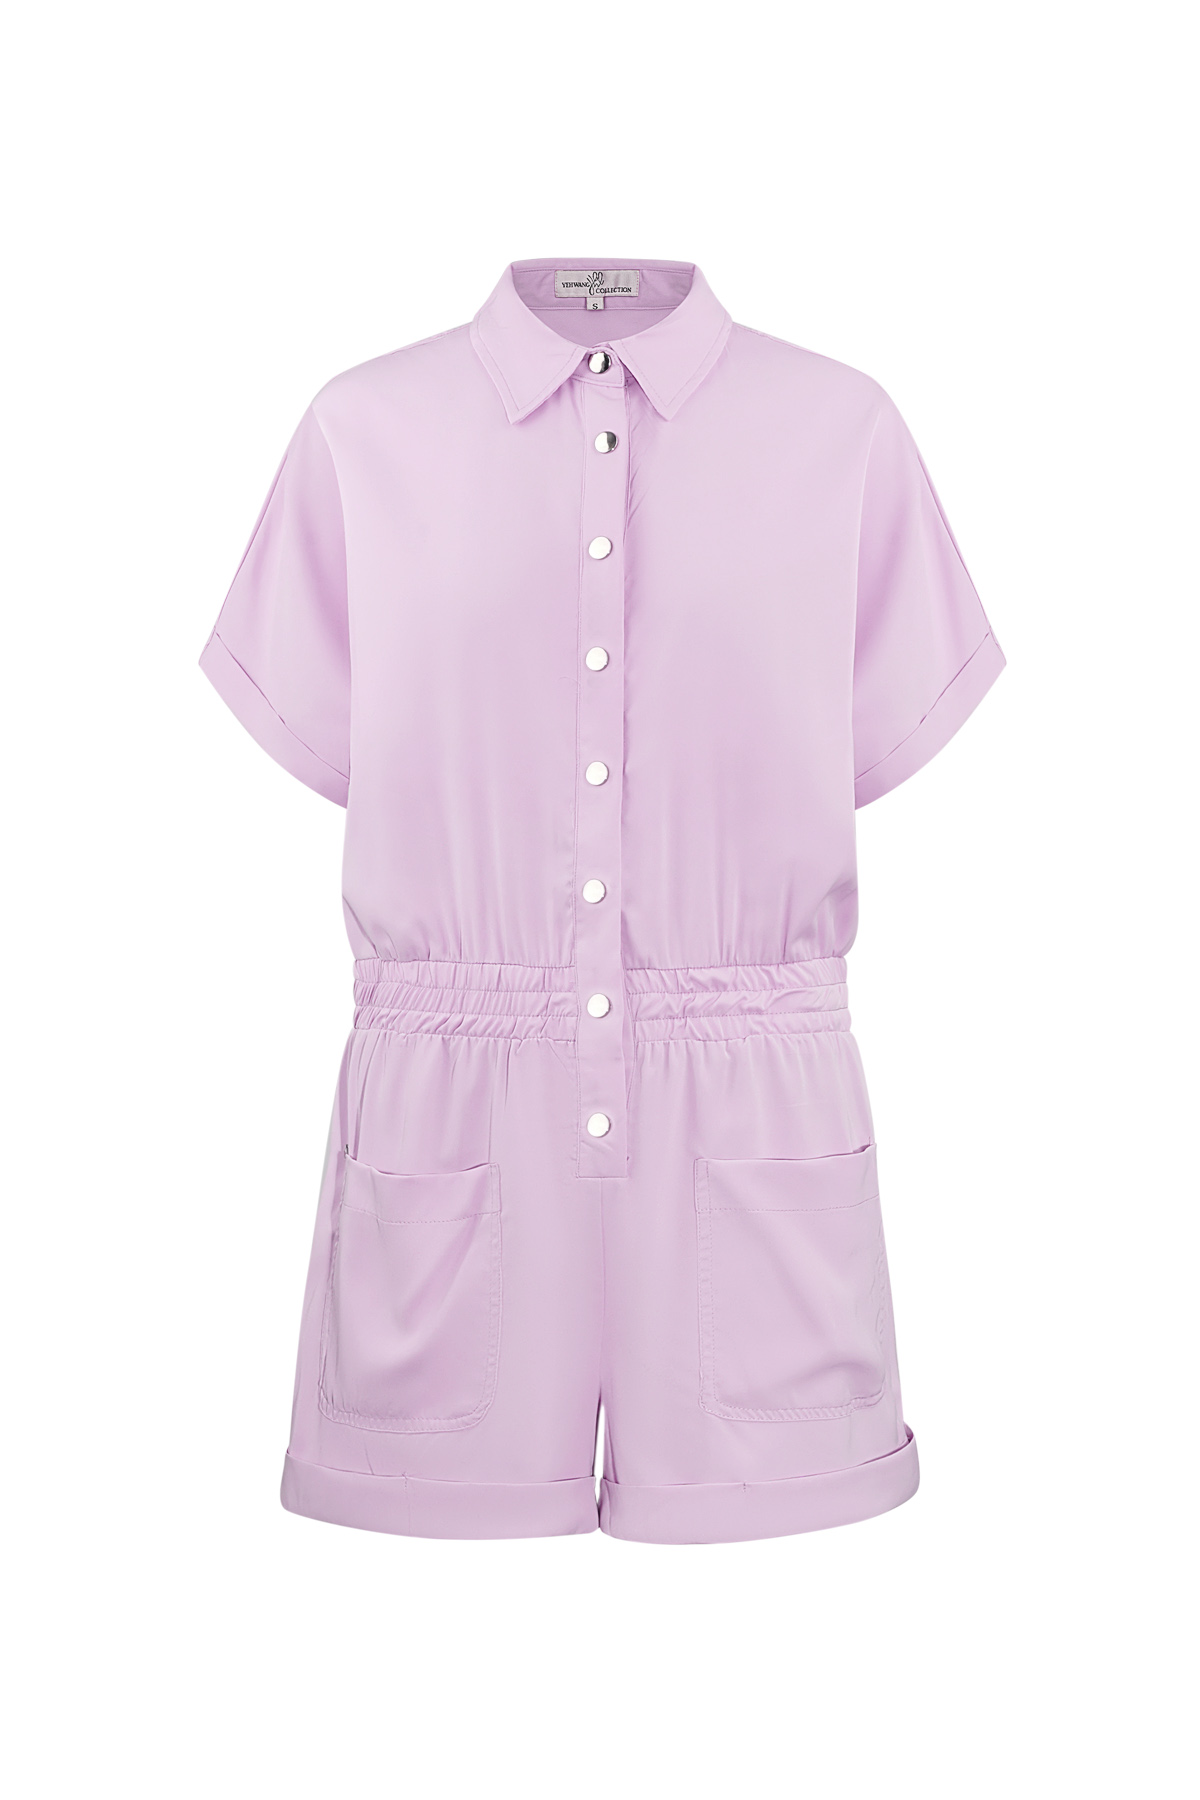 Colorful playsuit - lilac